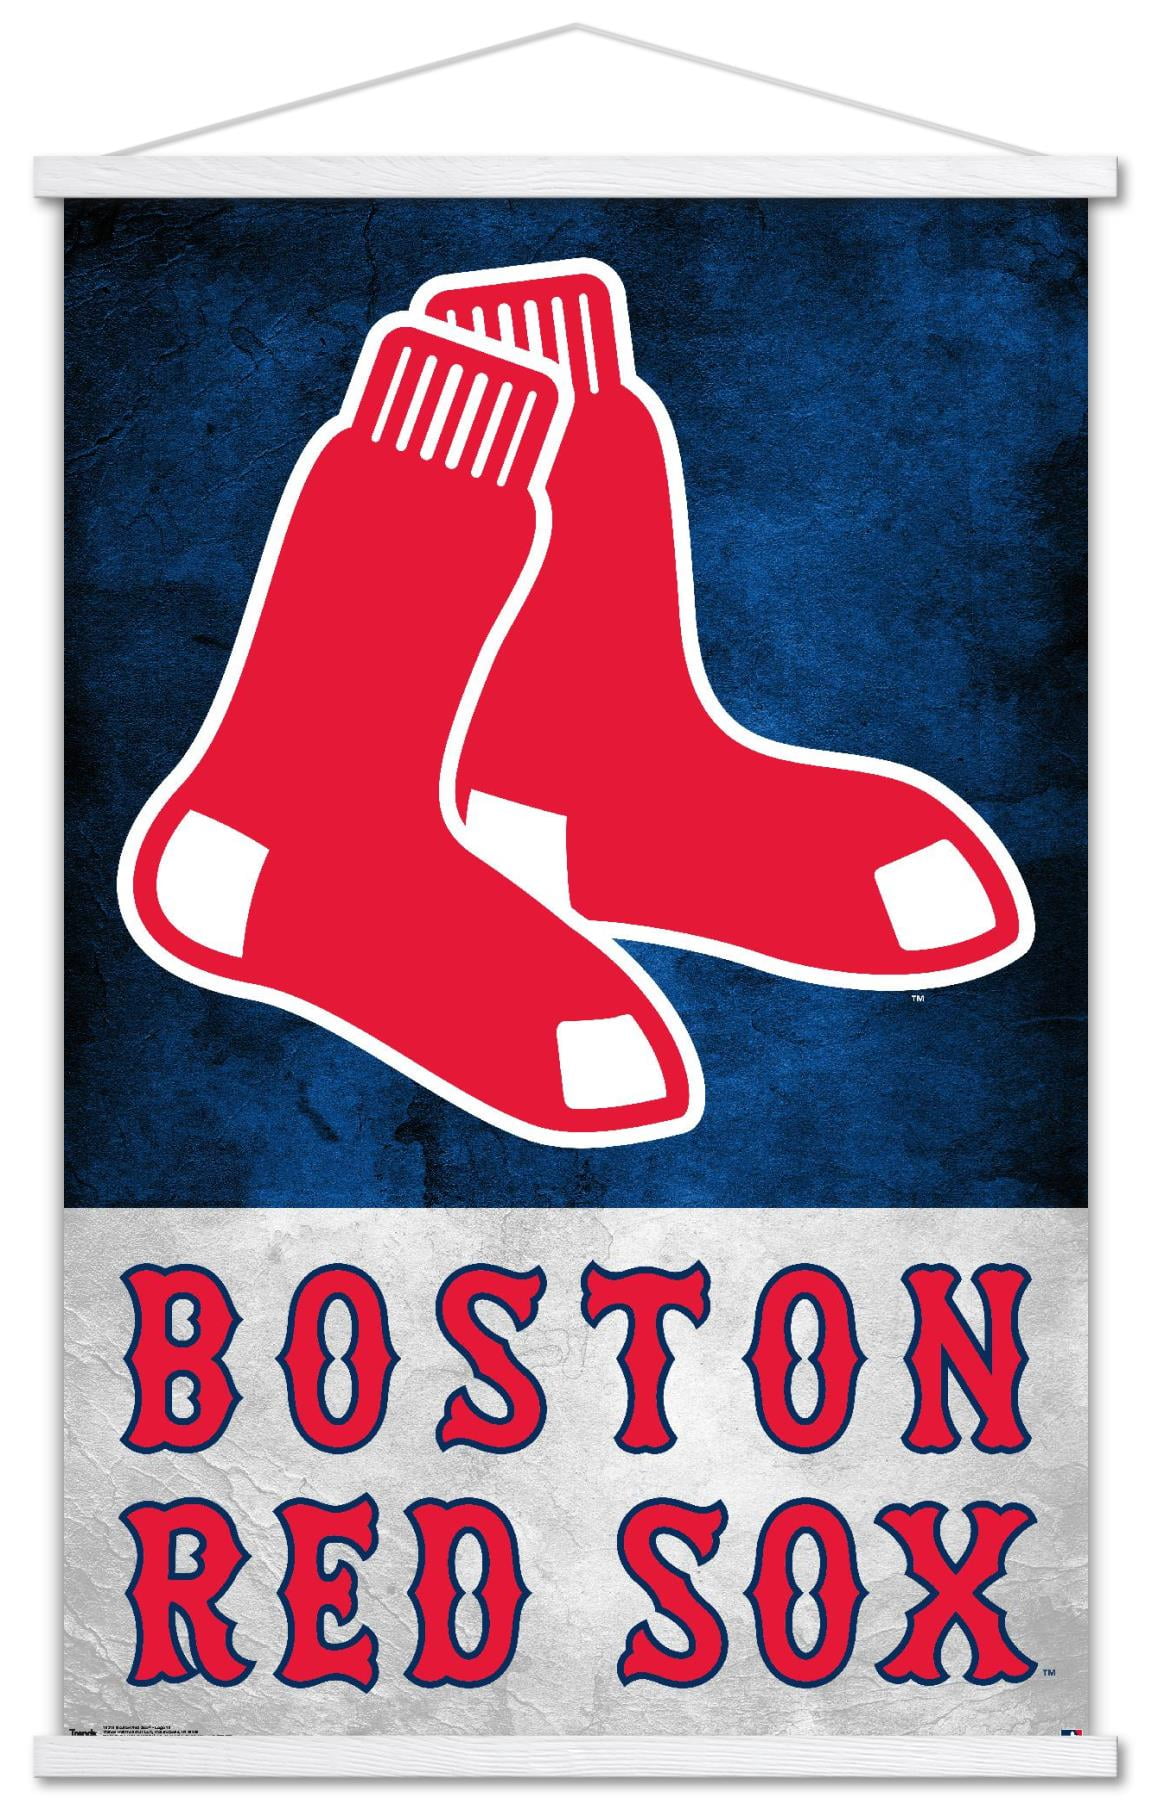 Boston Baseball Red Sox MLB Large 22x14 Wall Hanging Banner Featuring Logos  from 1908,1924,1979,2009